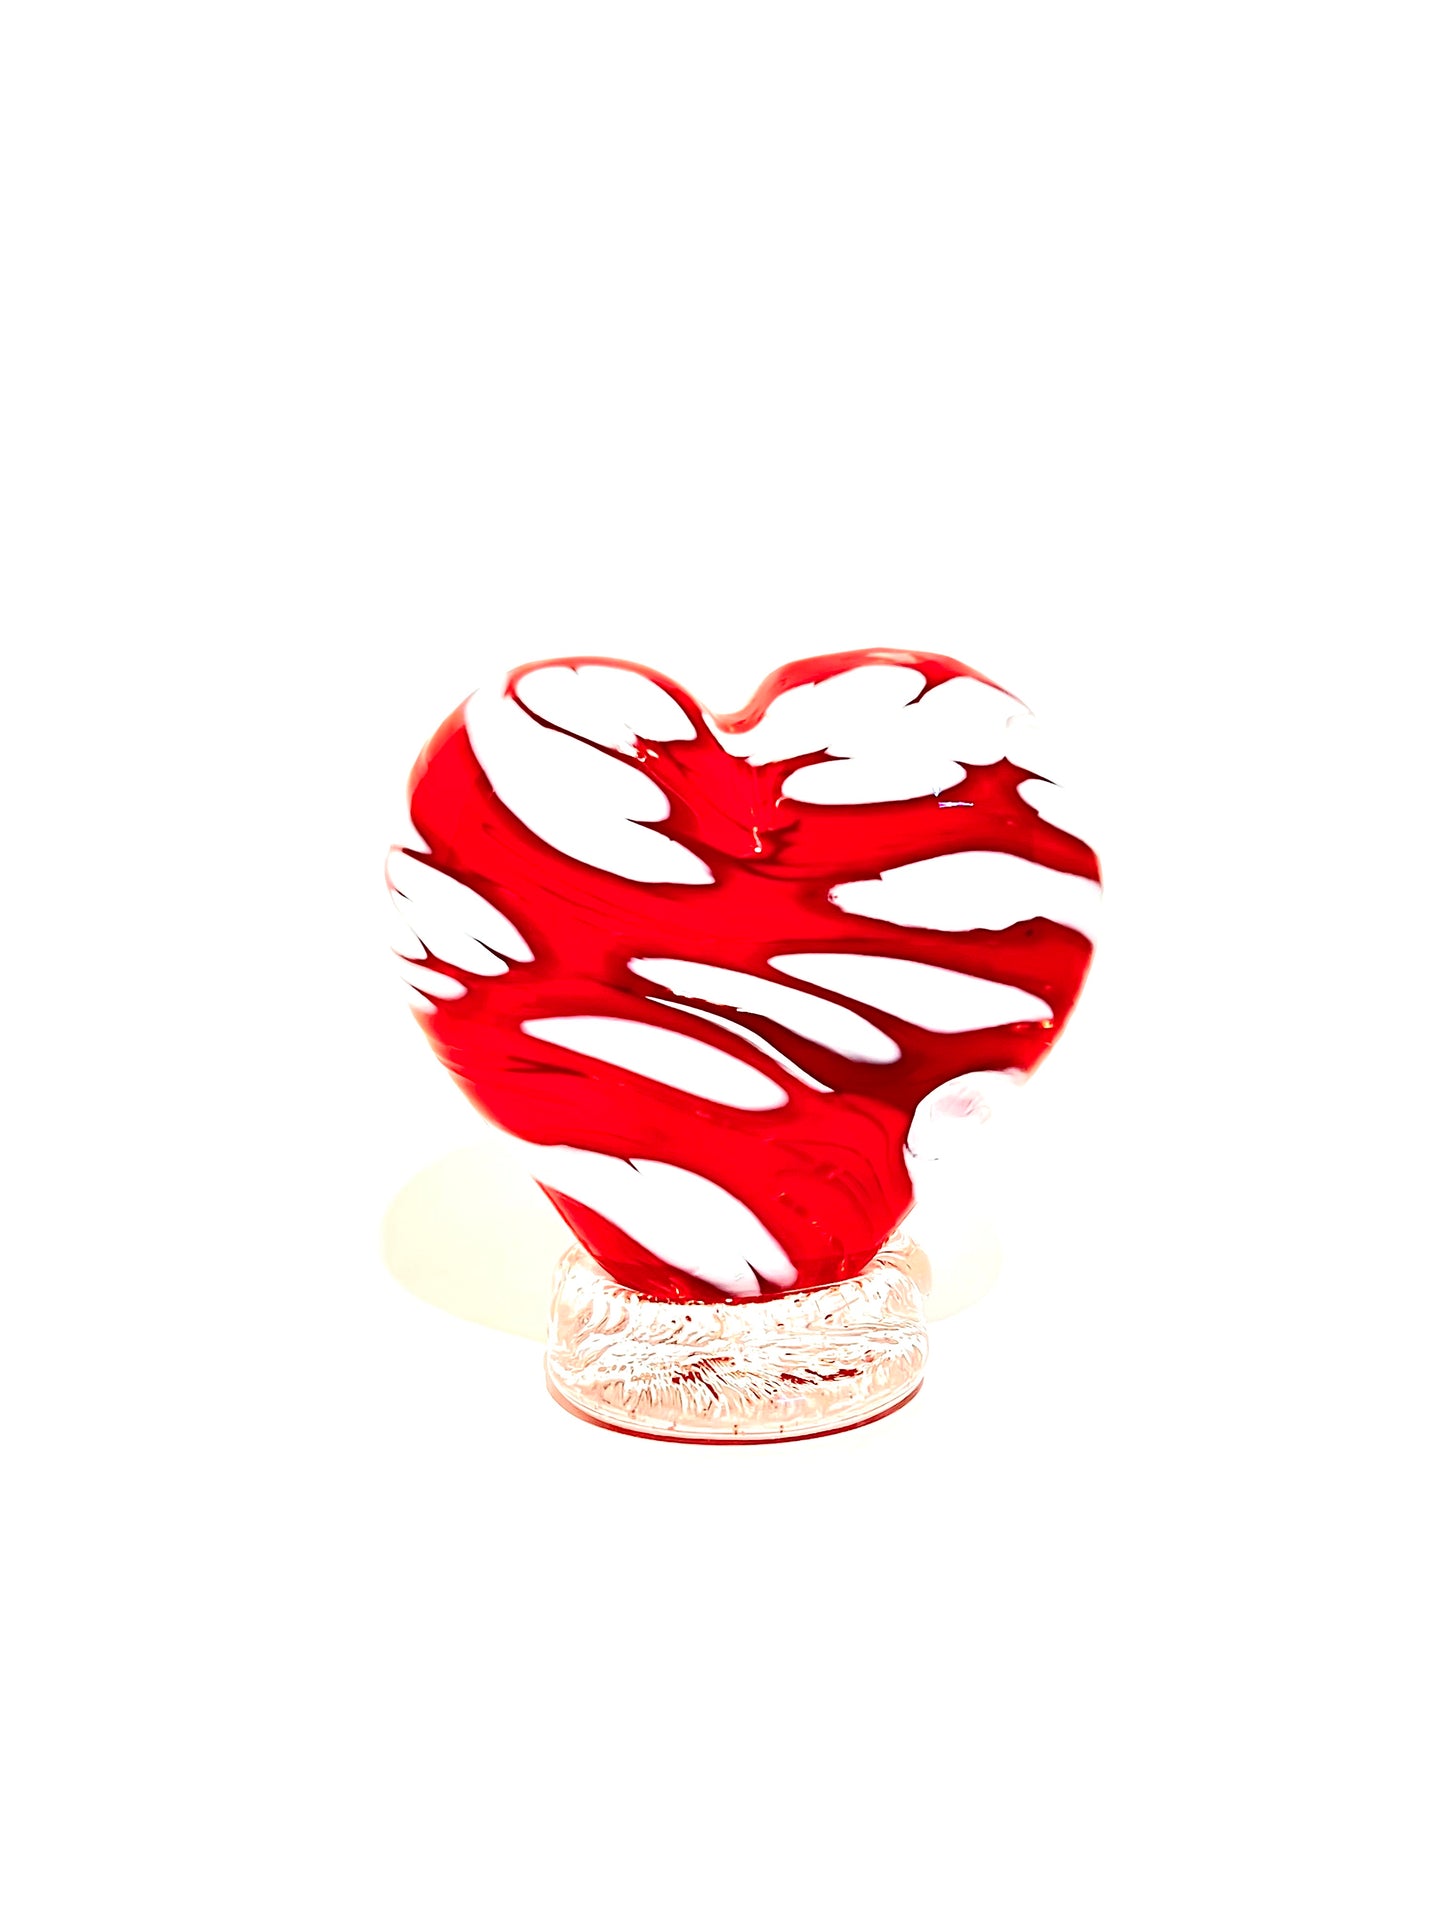 Standing Red and White Heart